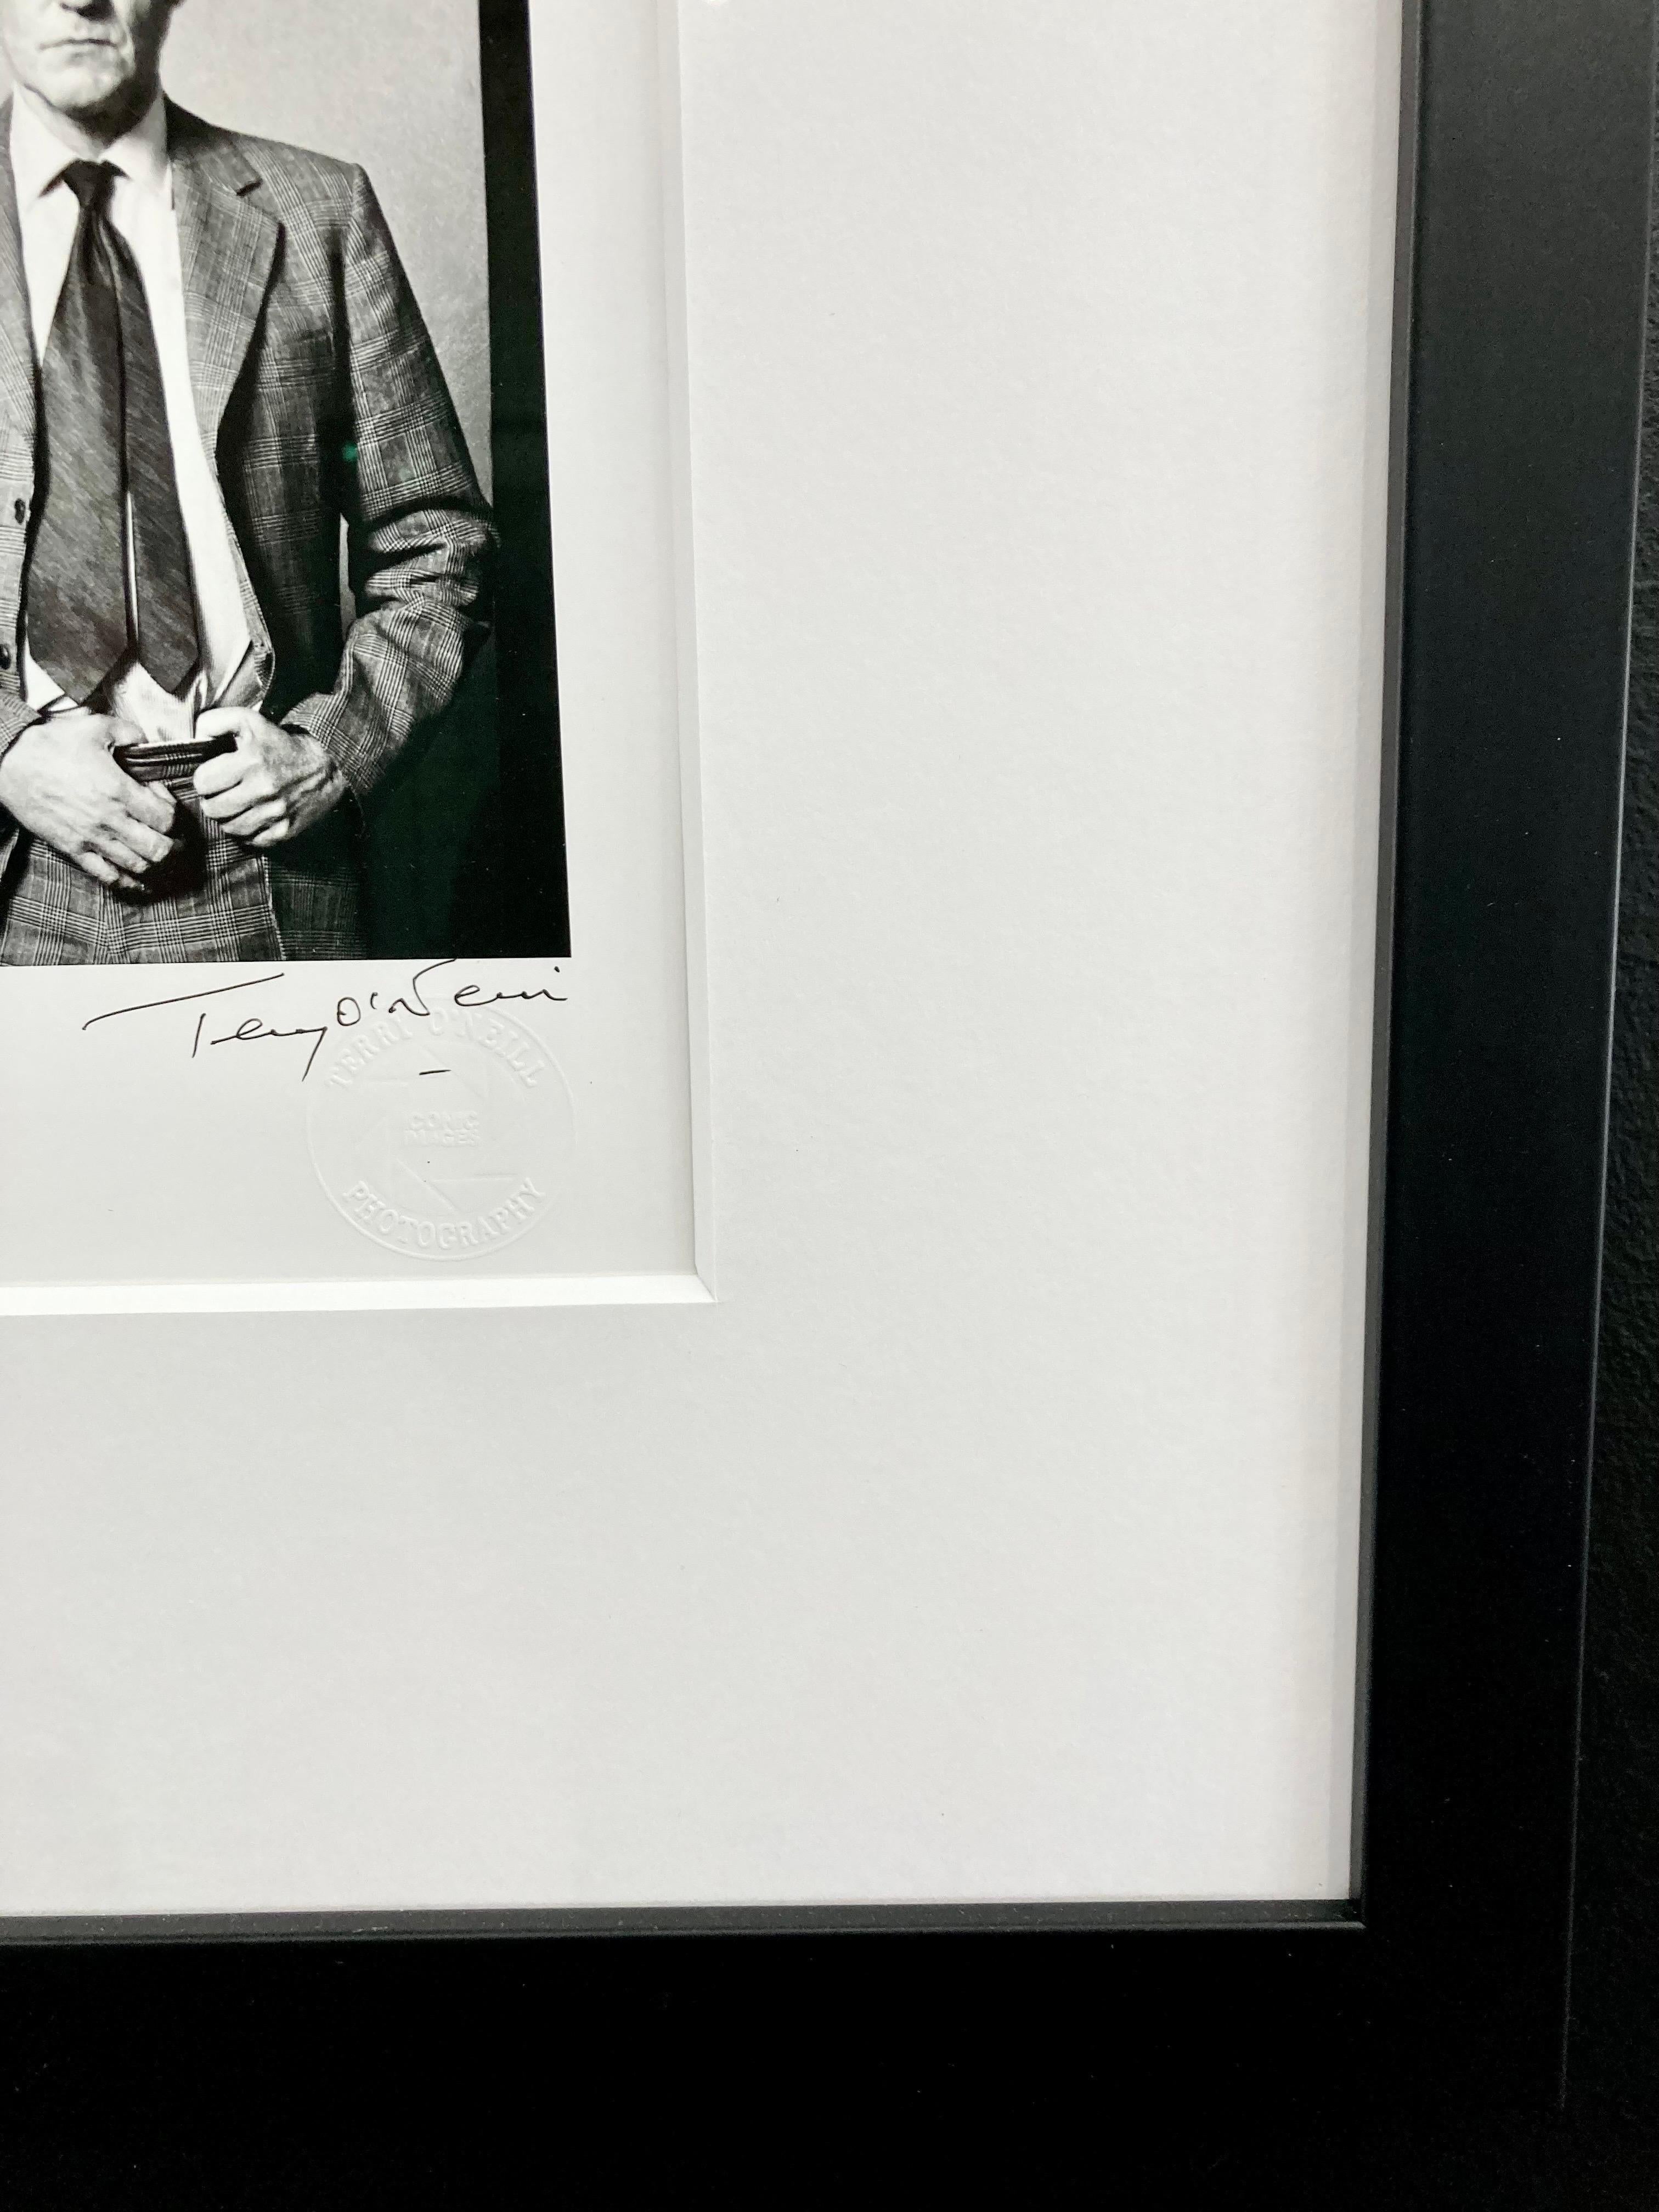 David Bowie and William Burroughs, framed signed print by Terry O'Neill For Sale 2